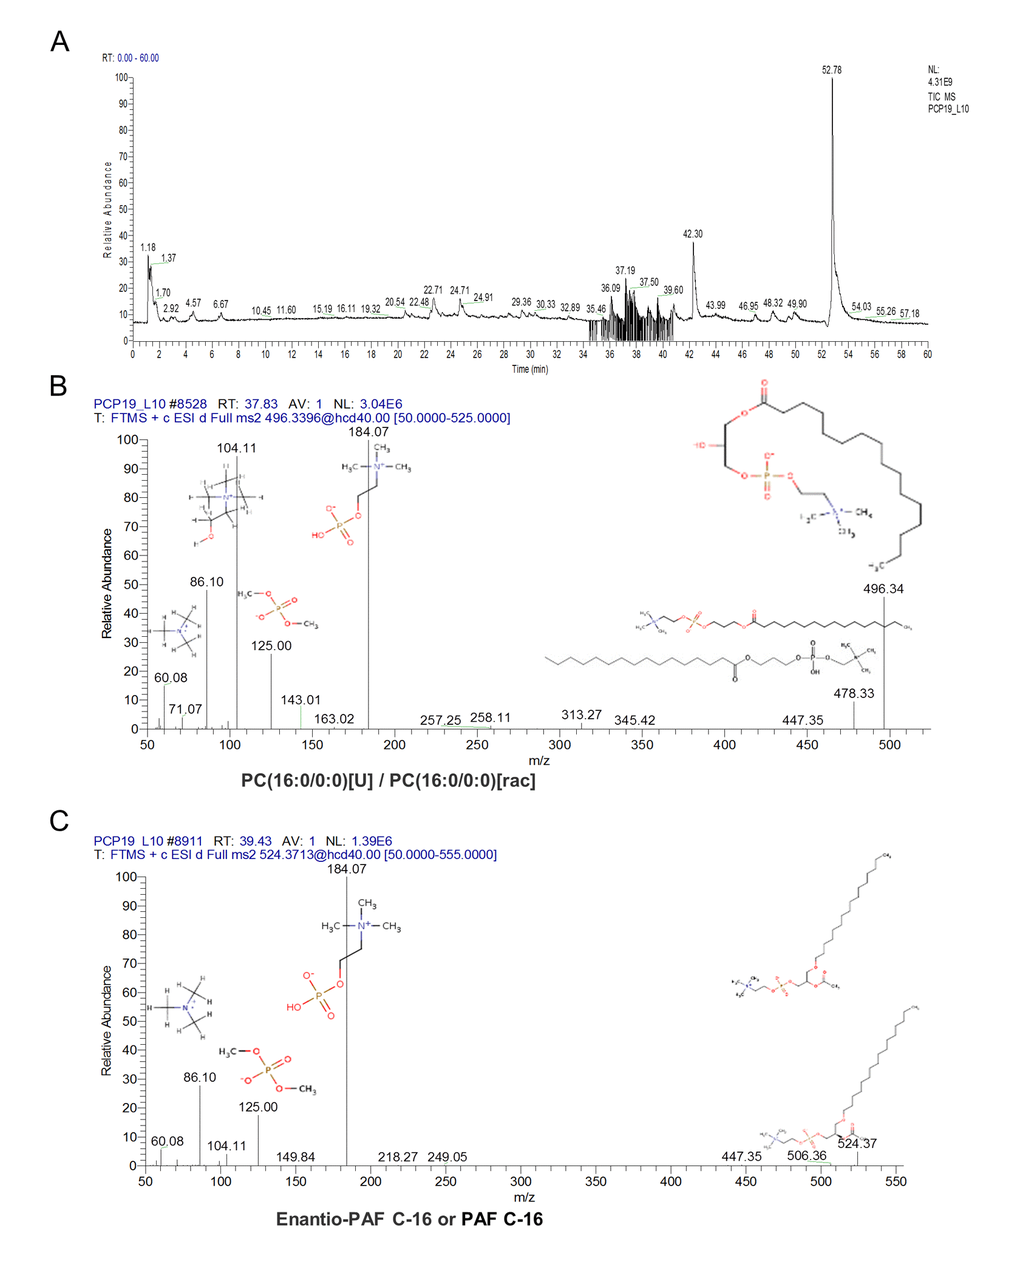 The characteristic of the altered content lyso phosphatidylcholine (LPC) and platelet-activating factor (PAF). Orbitrip coupled with HPLC detected altered content metabolites with the m/z = 496.3324 and 518.3168 that were continuously eluted in 34 - 41 minutes (A). The structure information obtained from Orbitrip showed m/z = 496.3324 is a kind of LPC (B), and m/z =518.3168 is a kind of PAF (C).